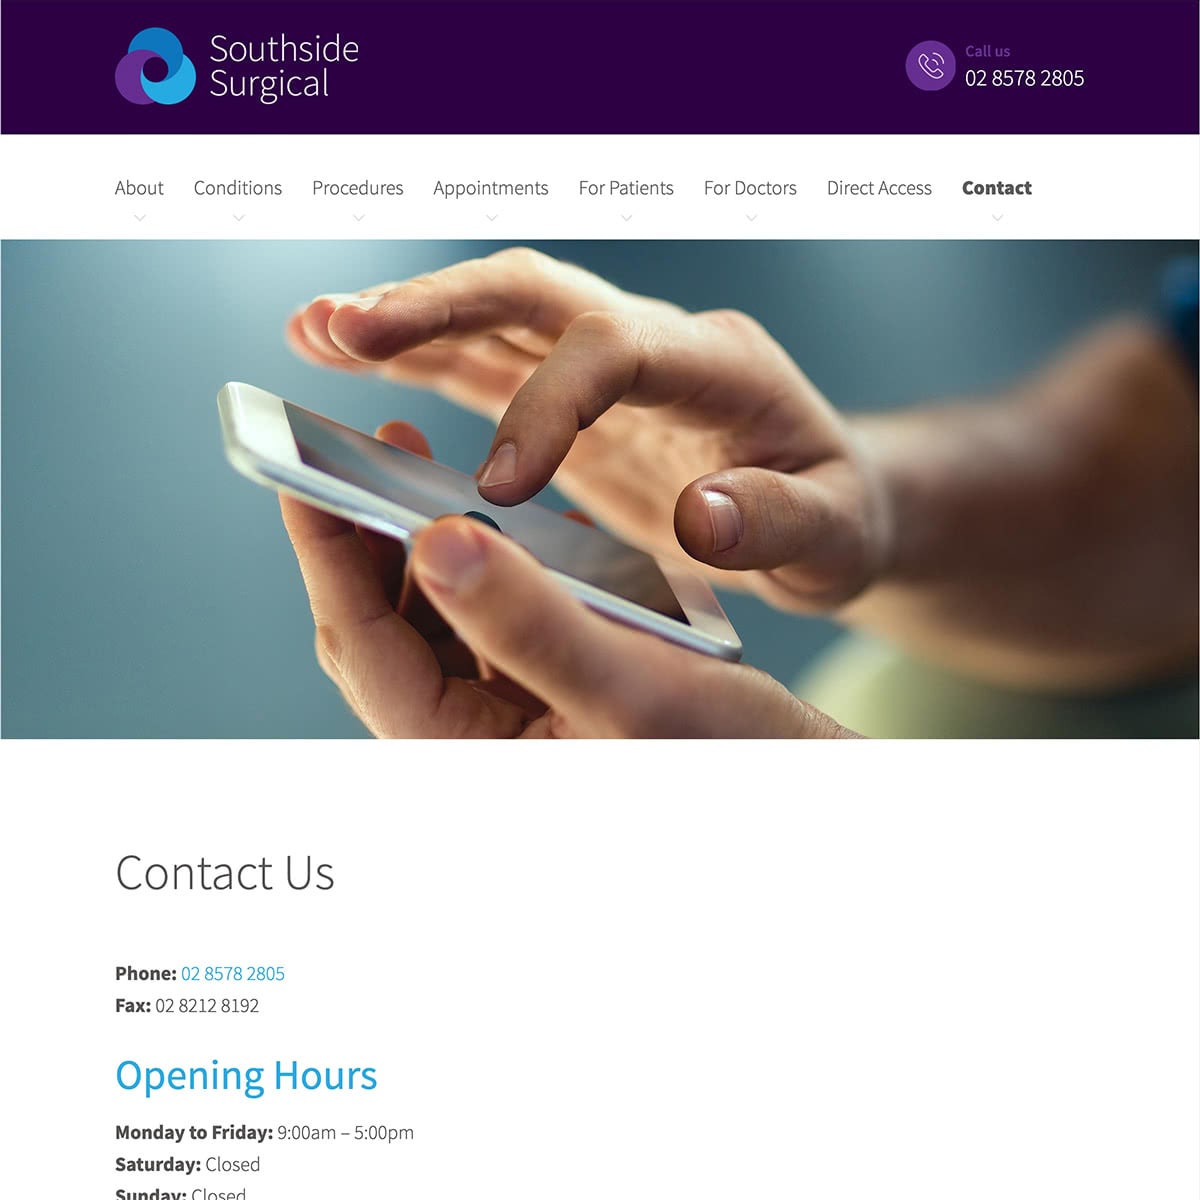 Southside Surgical - Contact Us